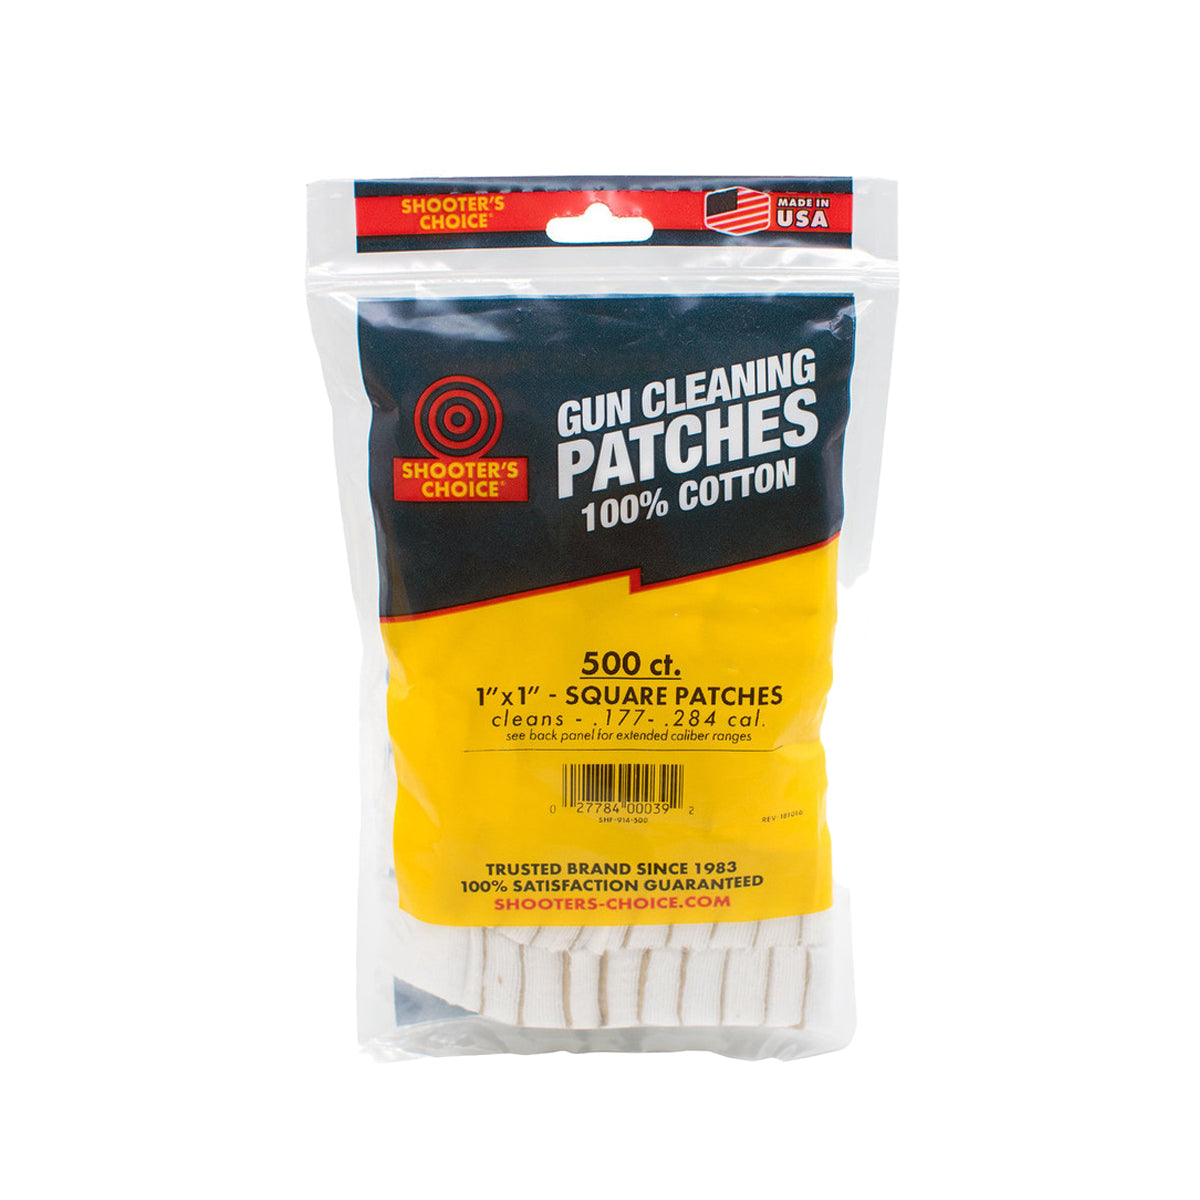 Shooter's Choice Cleaning Patches